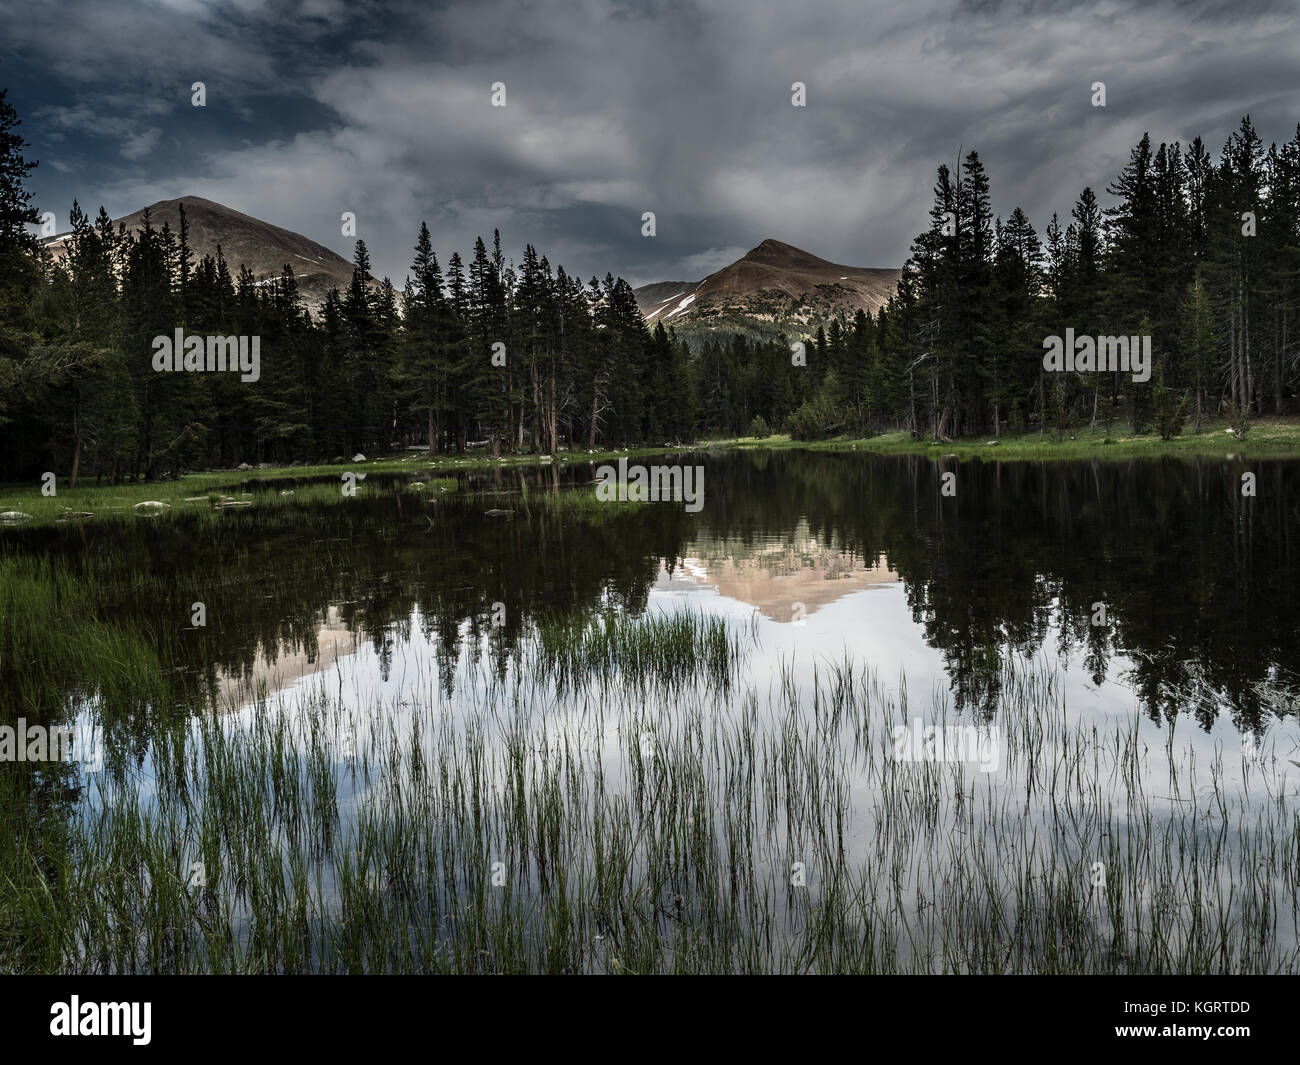 Mountains and Trees Reflected in a Lake in Tuolumne Meadows in Yosemite National Park in California, United States Stock Photo